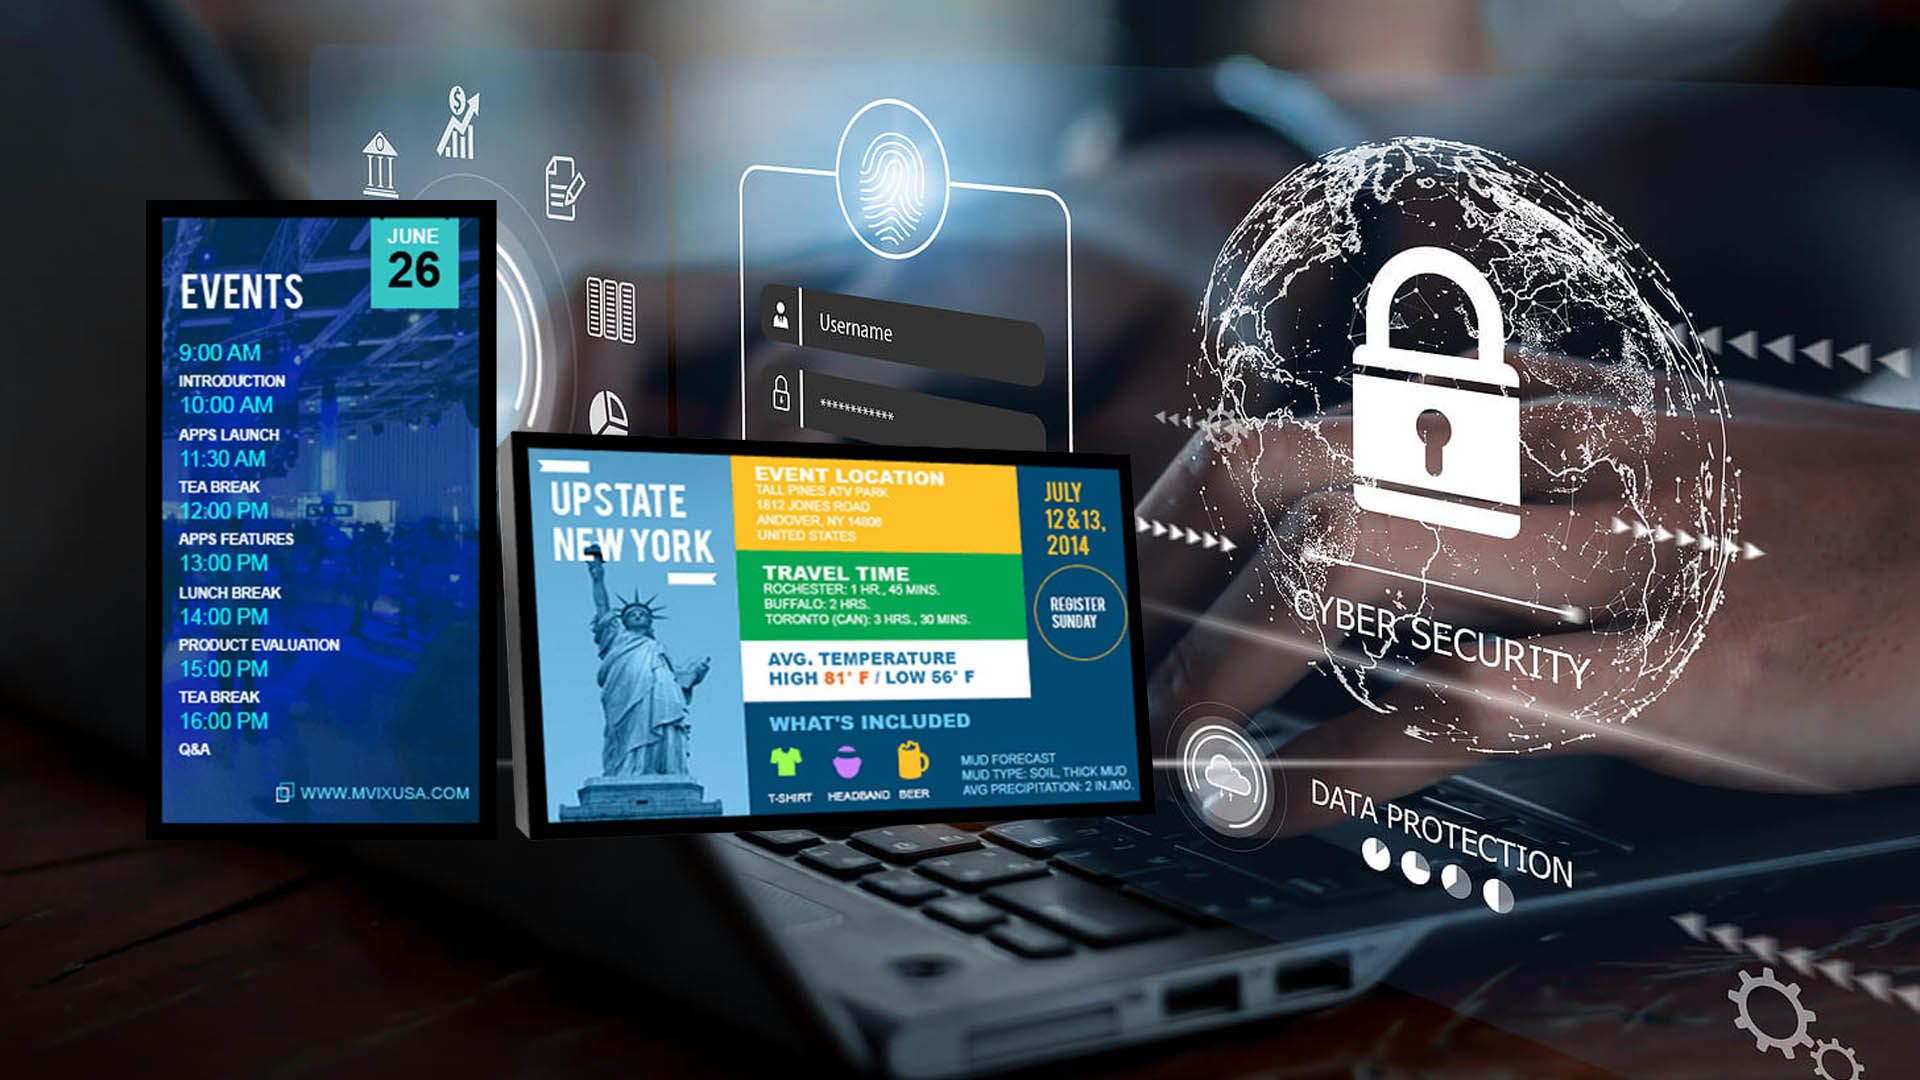 Digital Signage Security: Protecting Against Cyber Threats and Vandalism